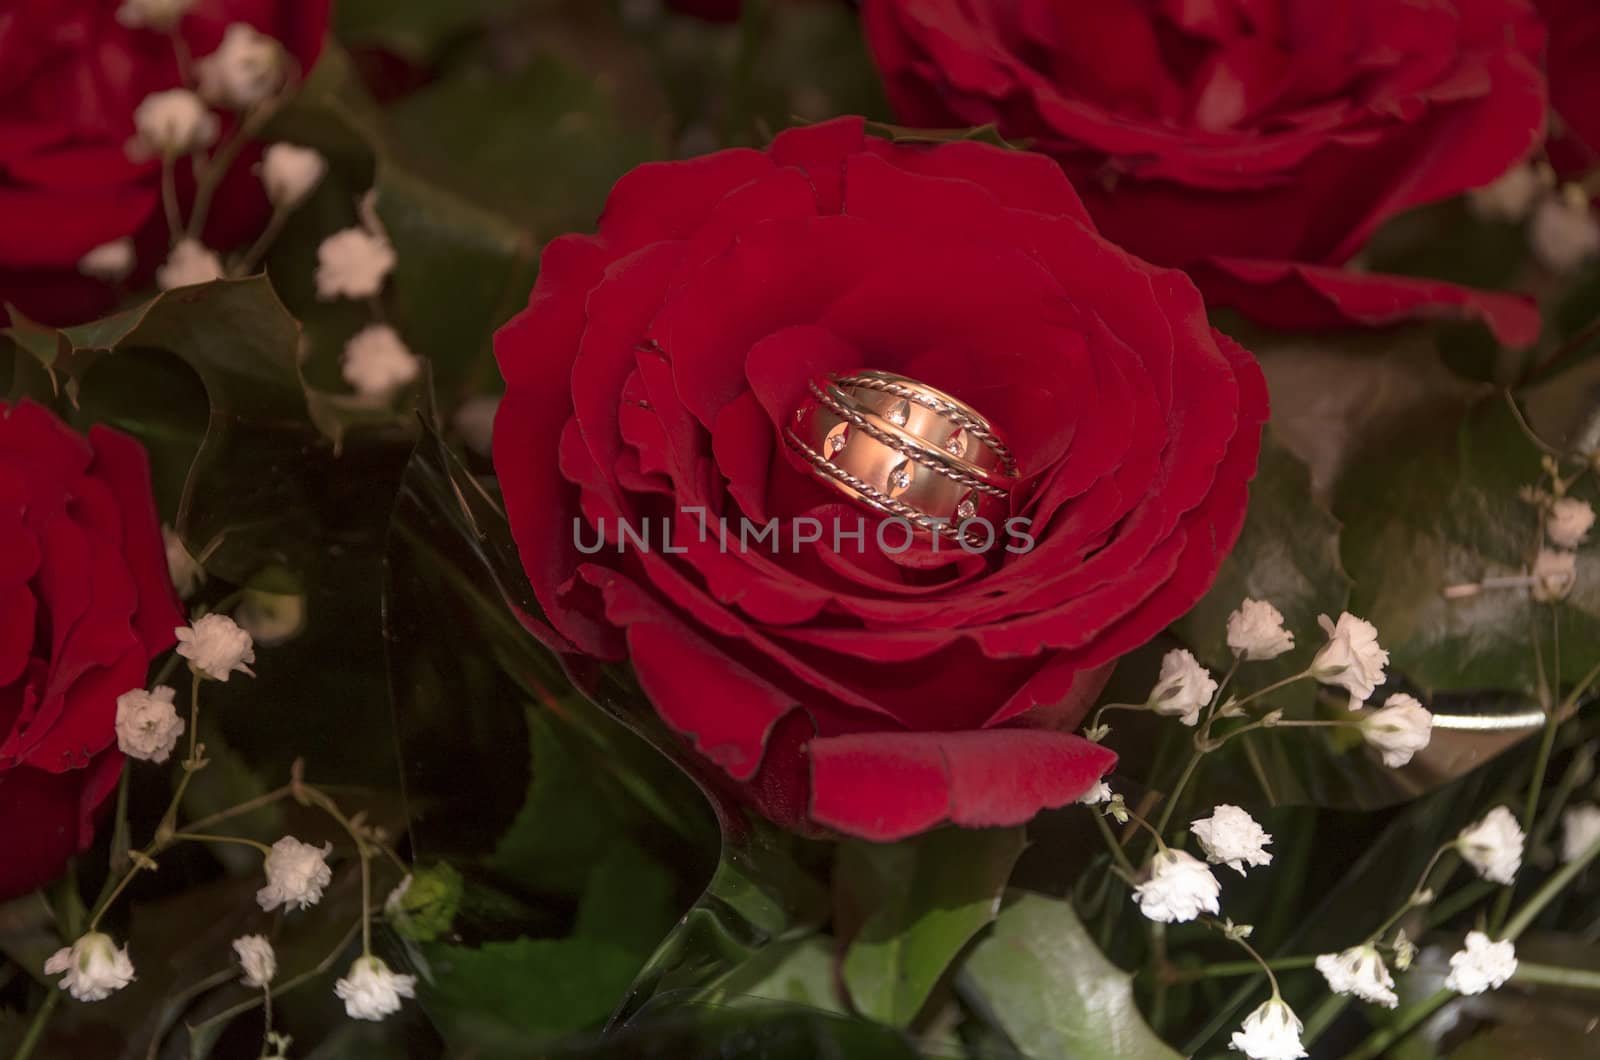 Wedding Bands and roses by puppiesam